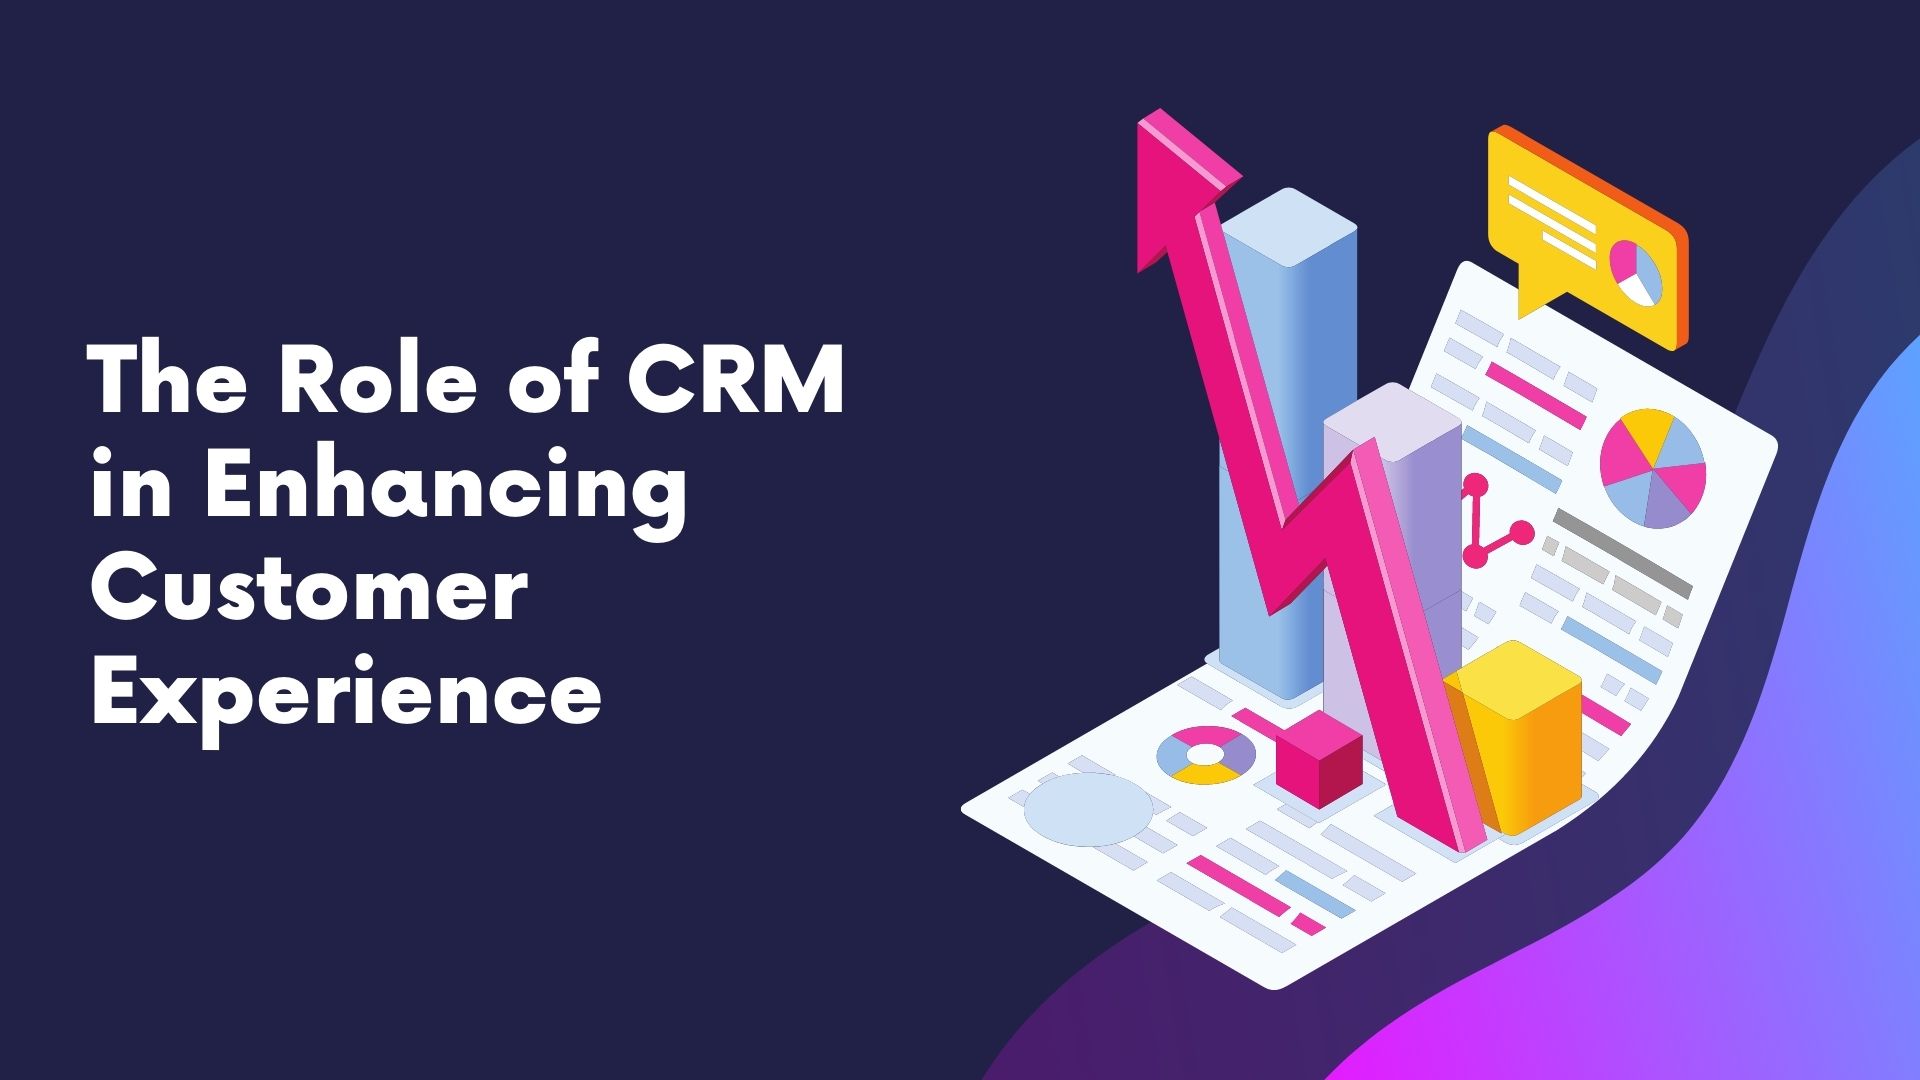 The Role of CRM in Enhancing Customer Experience